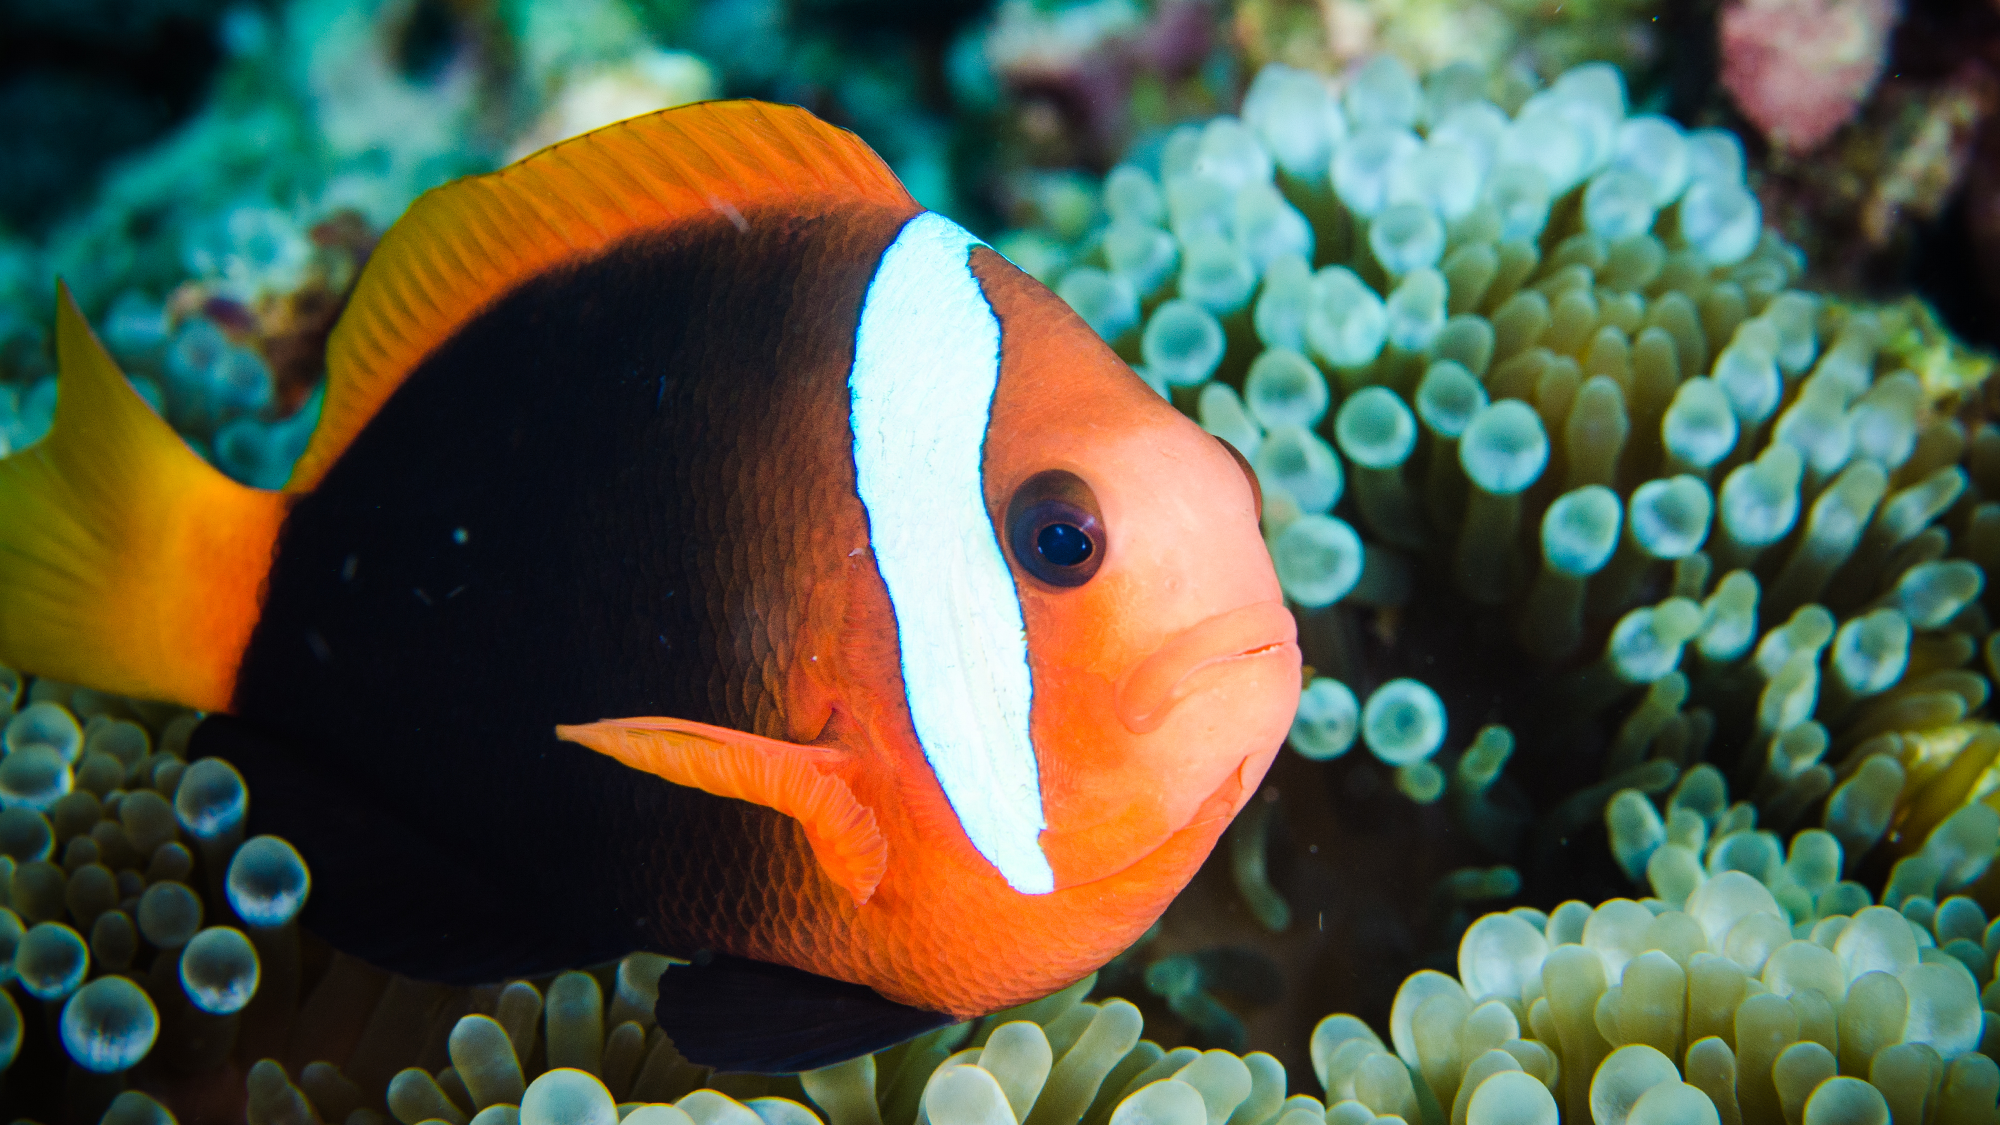 A clownfish swimming in an anemone.